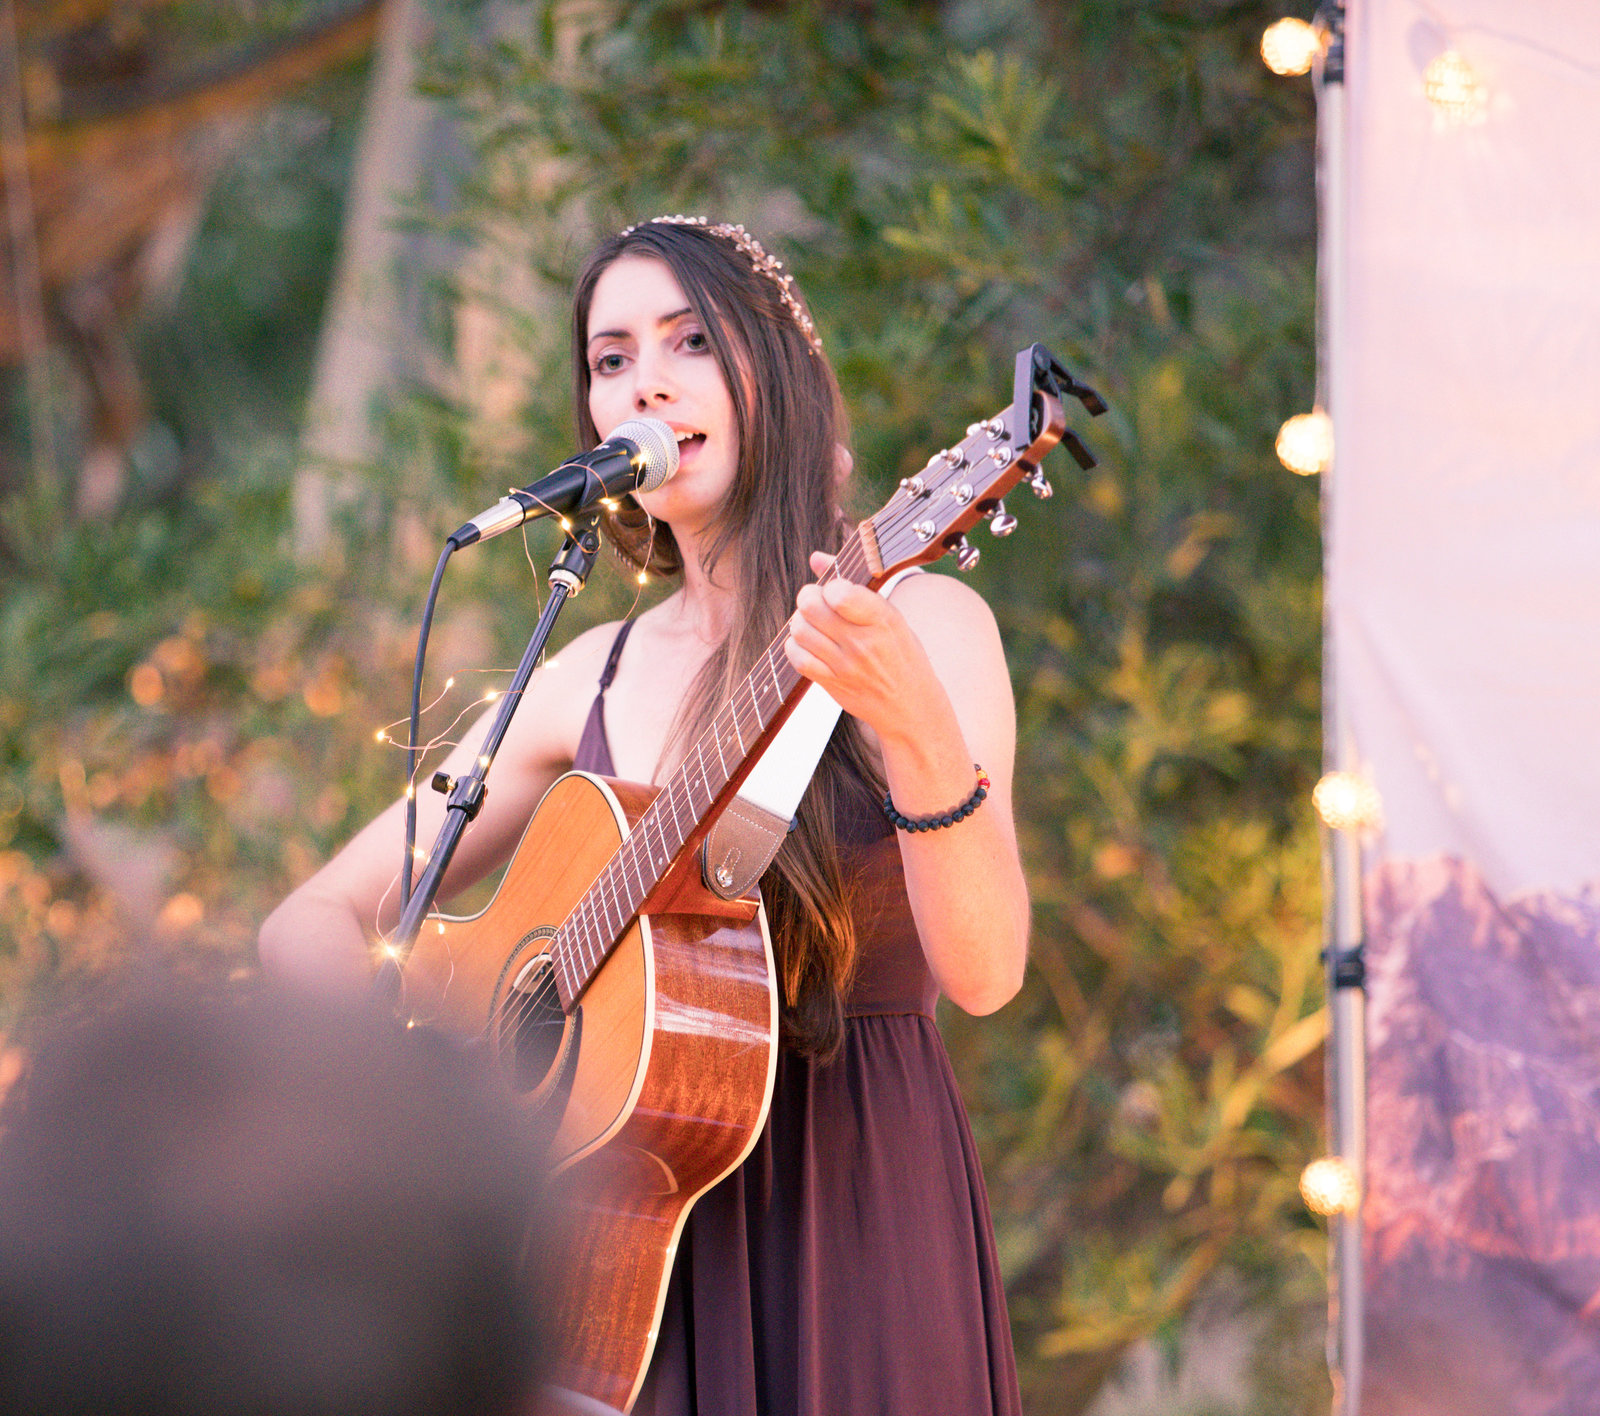 jessica-allossery-house-concert-usa-tour-canada-indie-singer-songwriter-folk-3